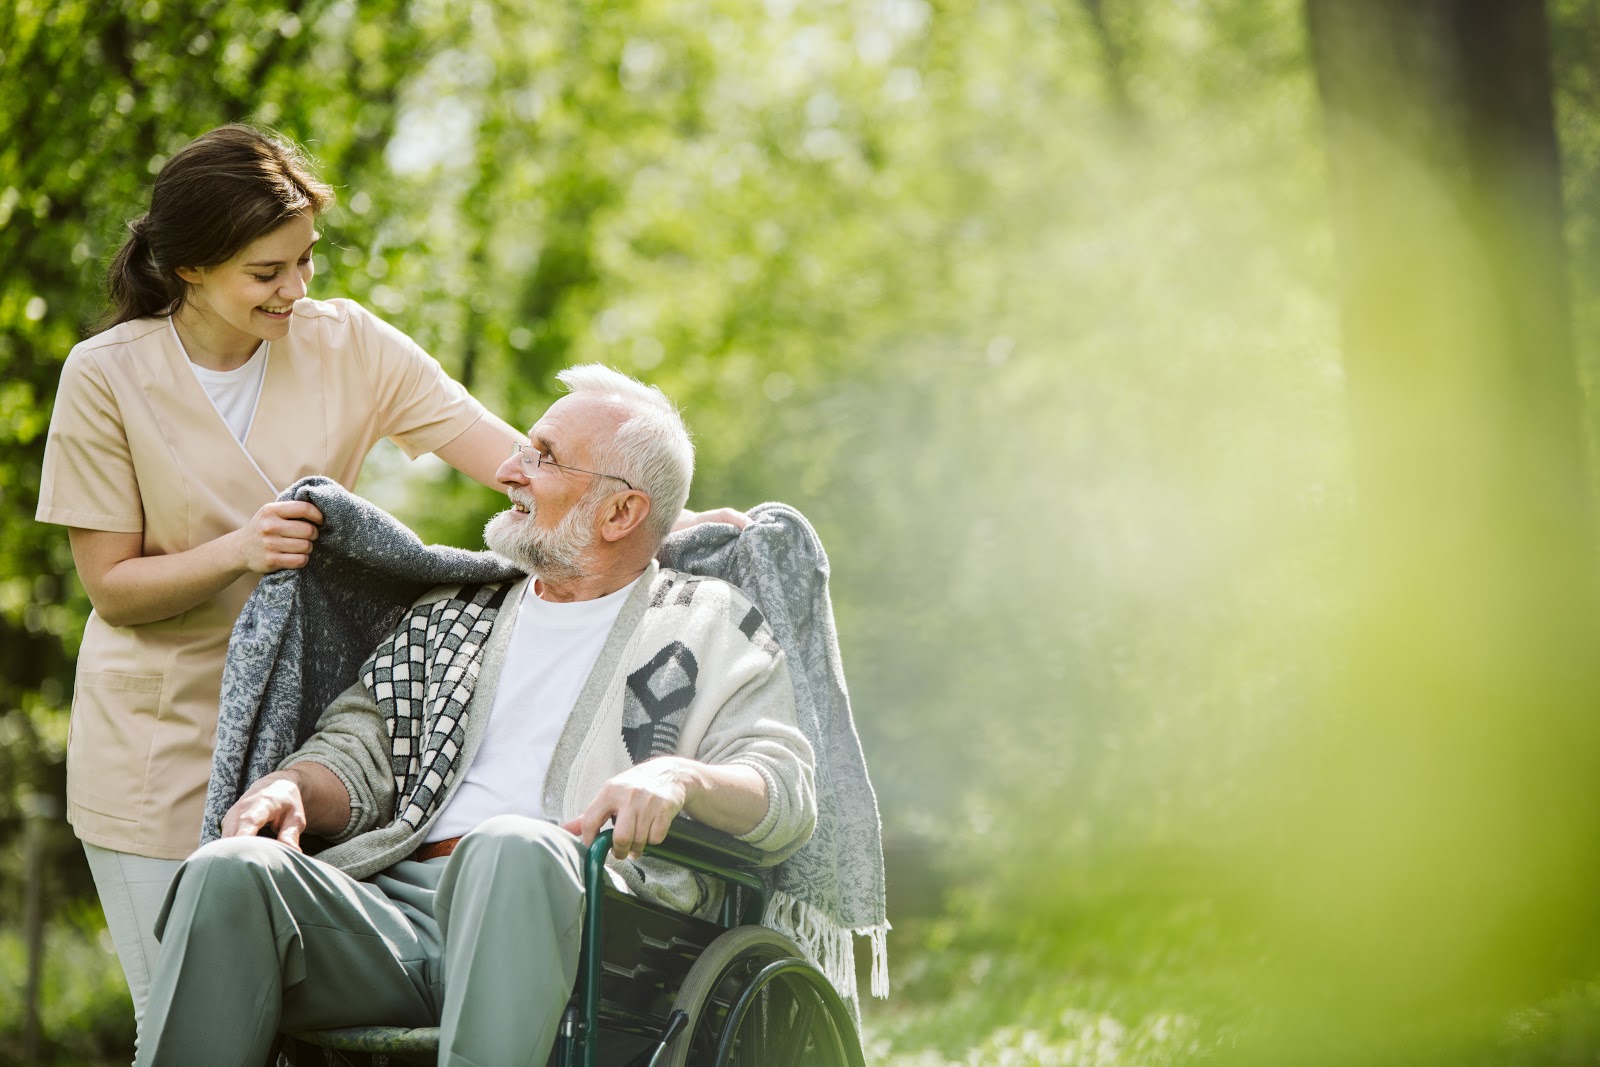 All You Need To Know About Domiciliary Care Jobs